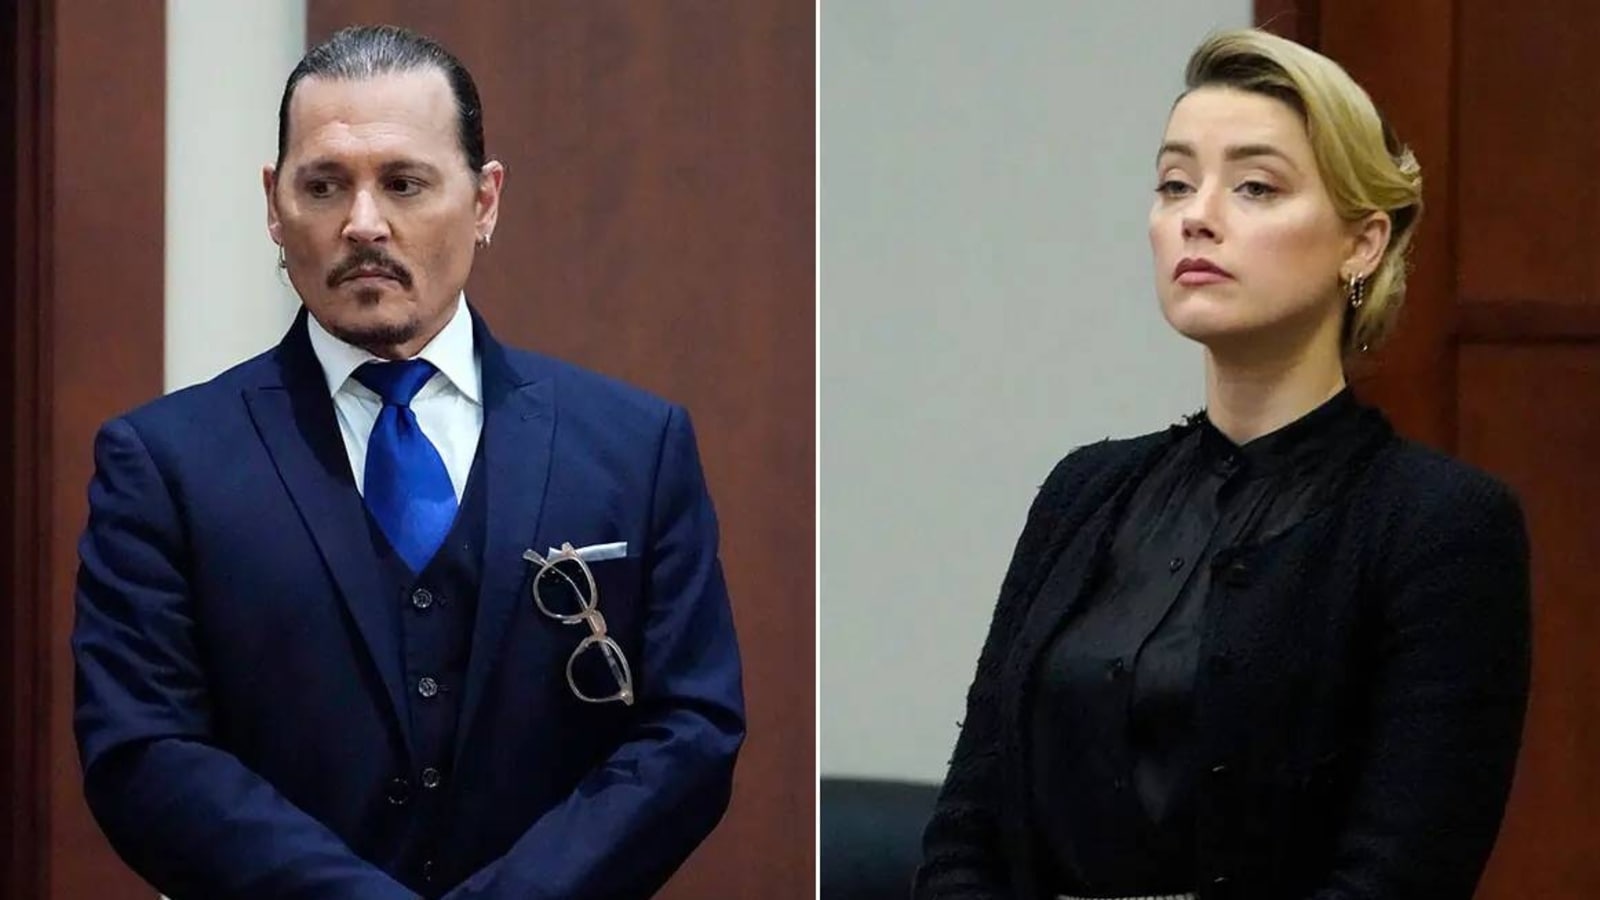 On Johnny Depp-Amber Heard trial, a documentary on the turning